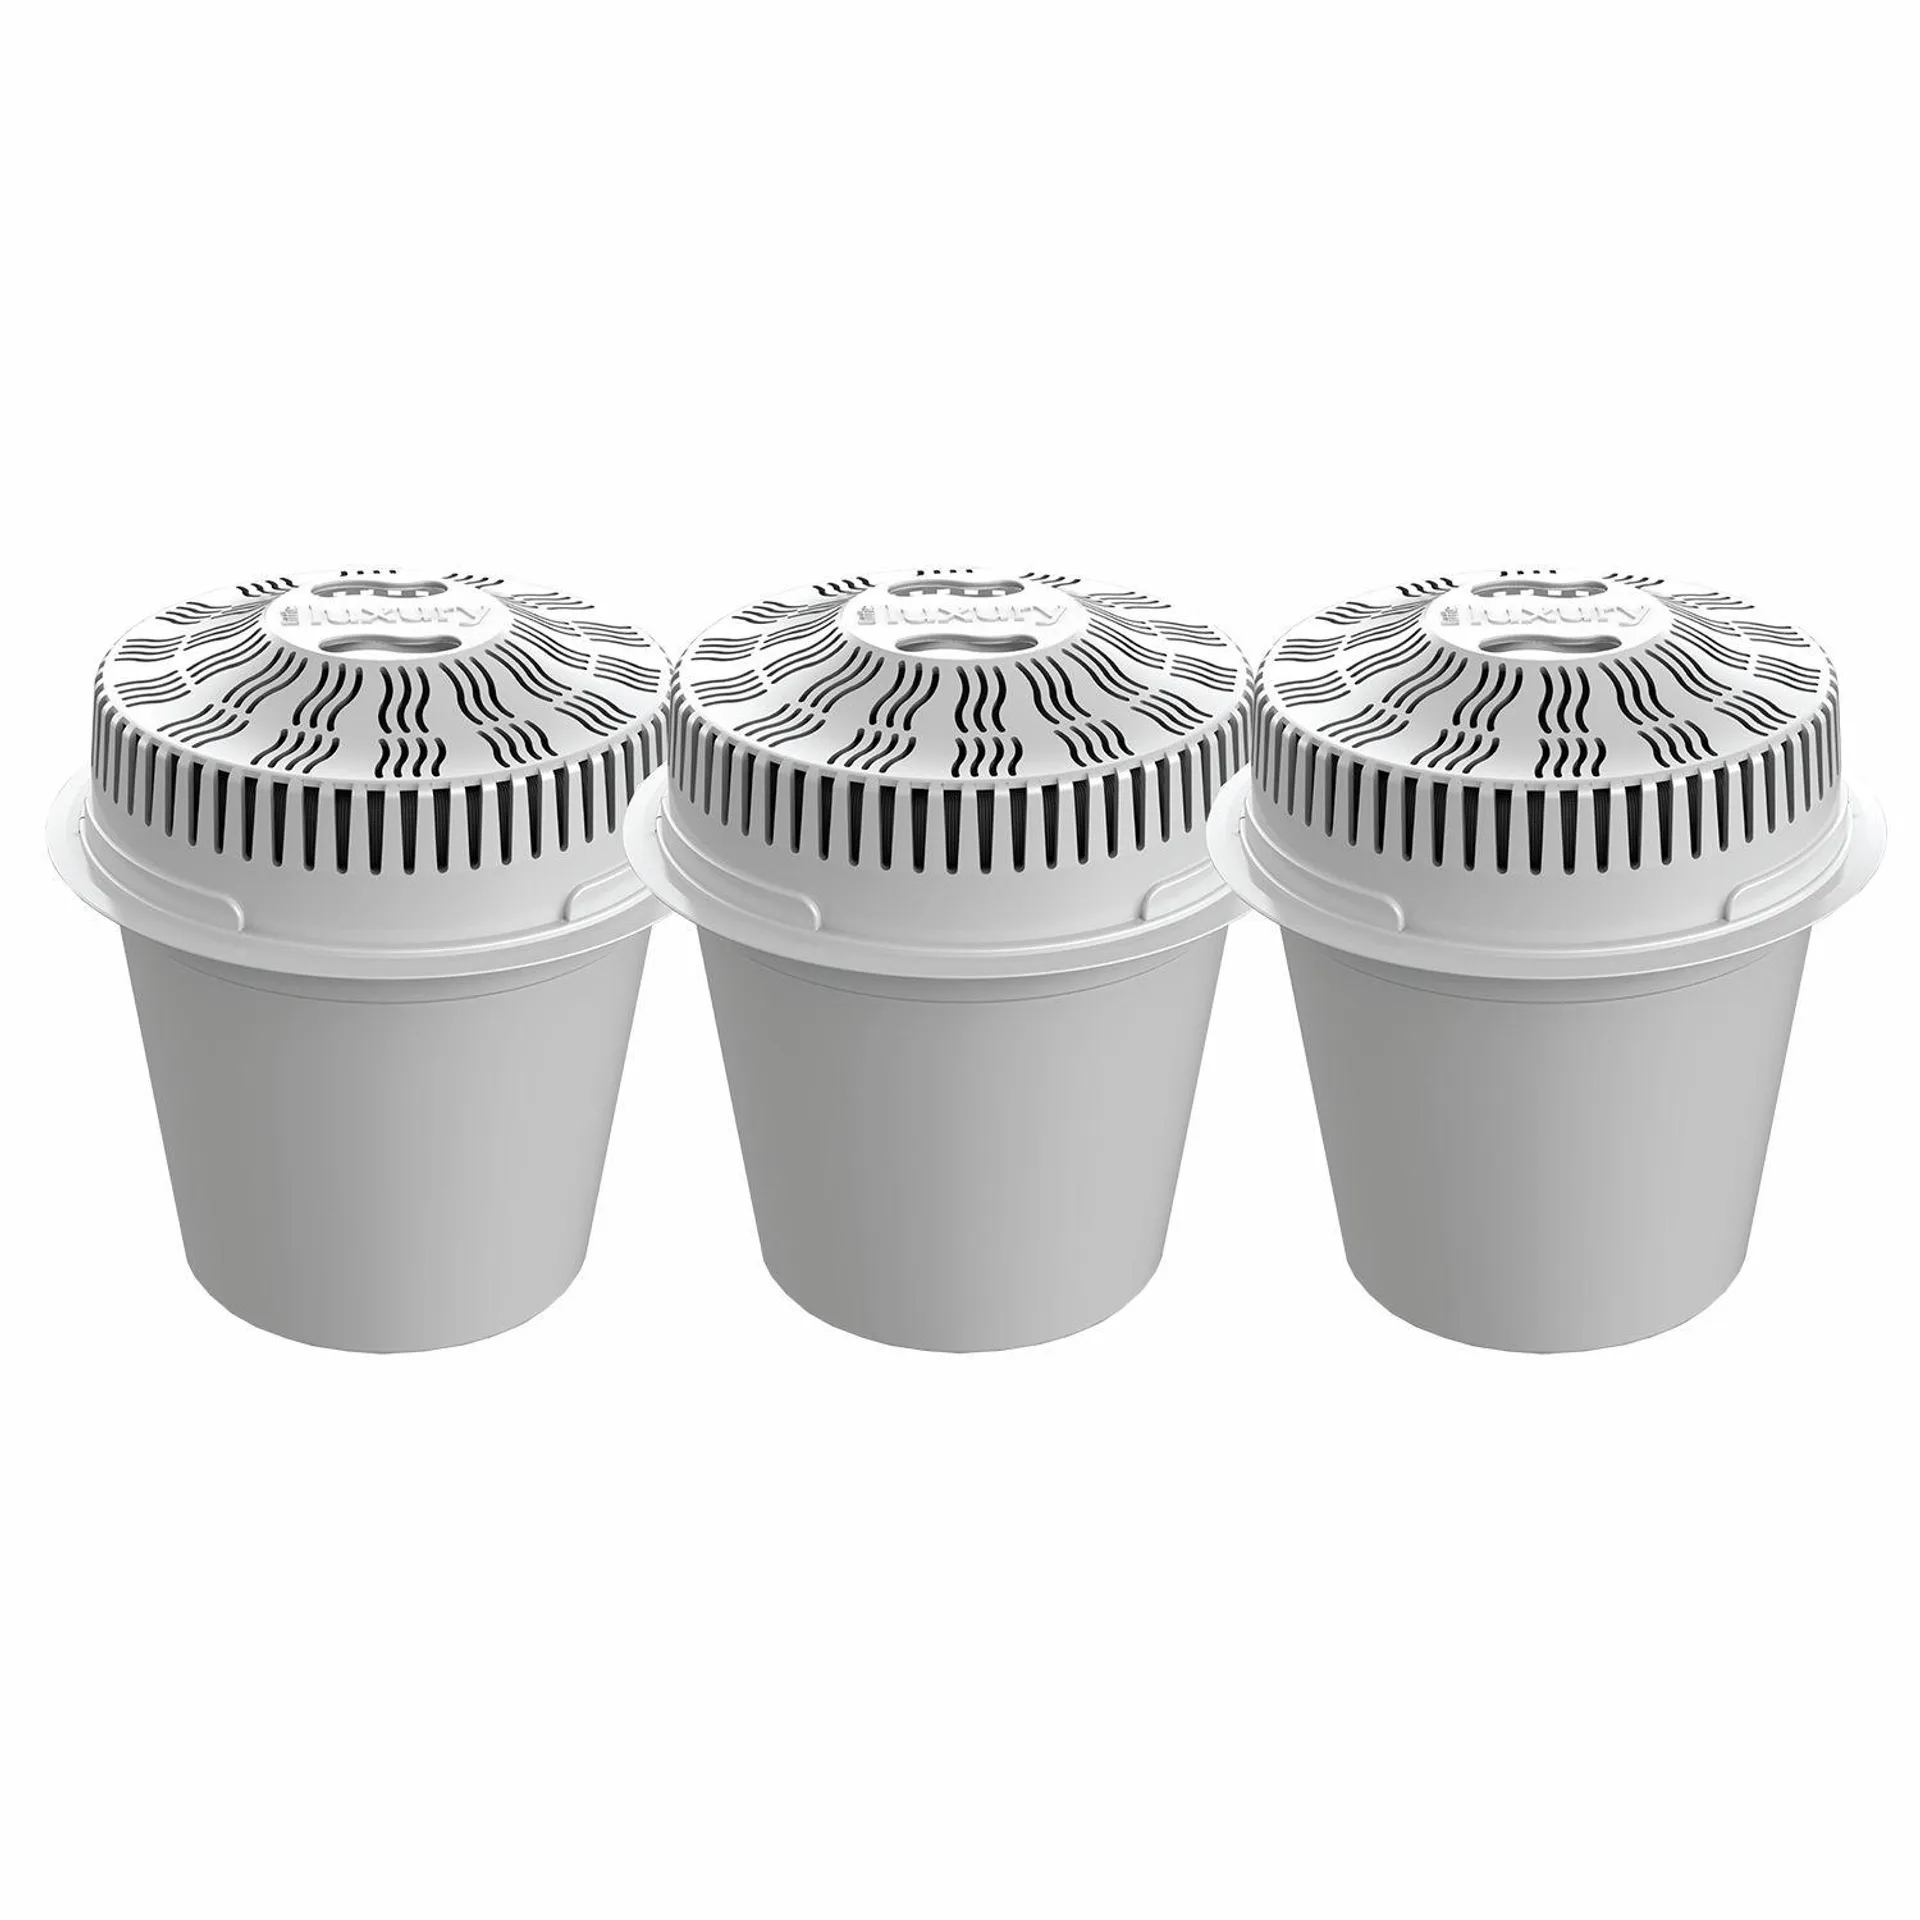 Little Luxury Vitality Replacement Filter Cartridges - 3 Pack